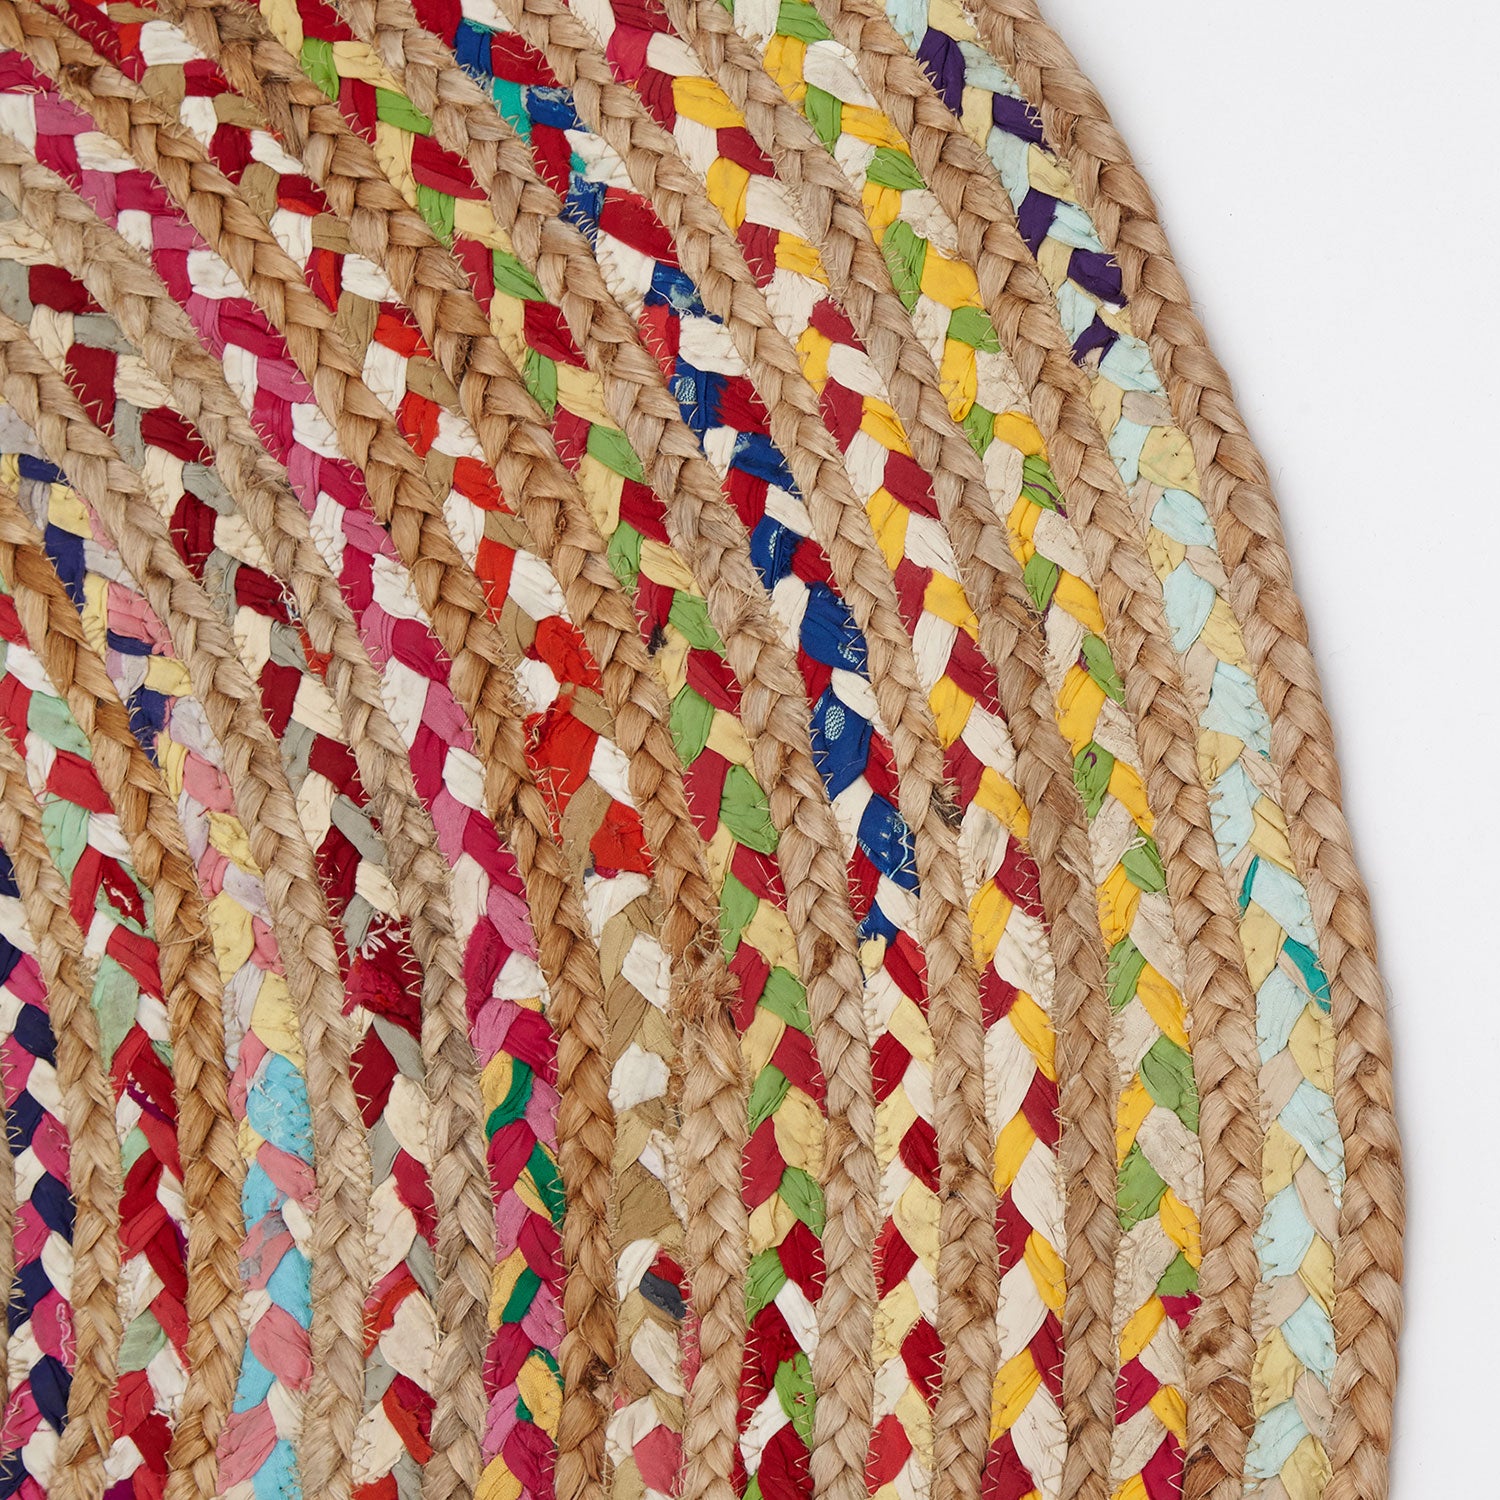 Fusion Handwoven Round Natural Jute Rug